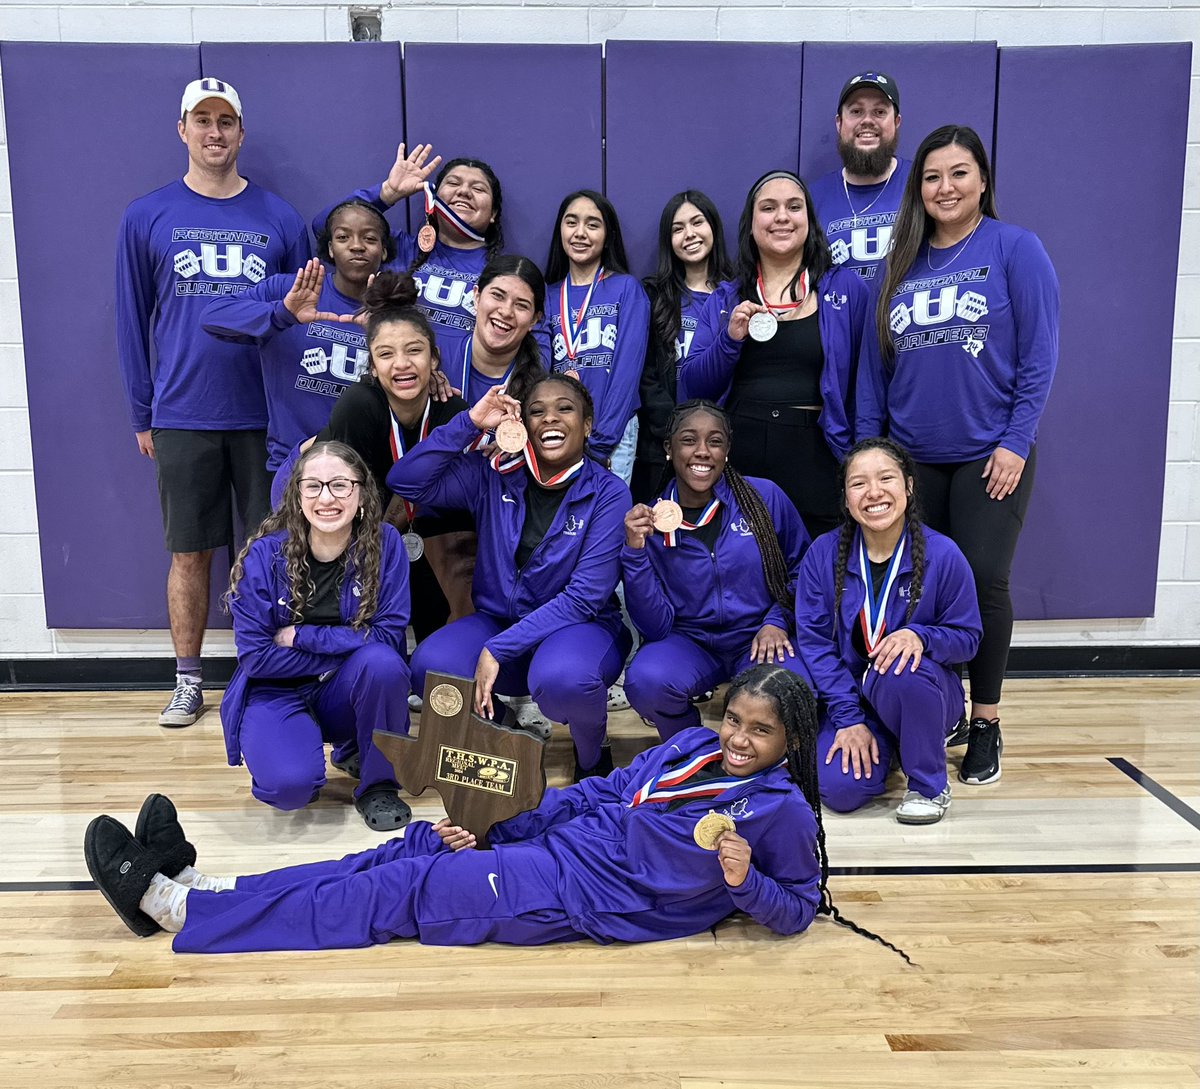 10 medals, 3 state qualifiers, 3rd place team! Great job last night Trojans! We are so proud of you! #ItsAllAboutTheU #FearTheSouth #TrojanStrength #THSWPA